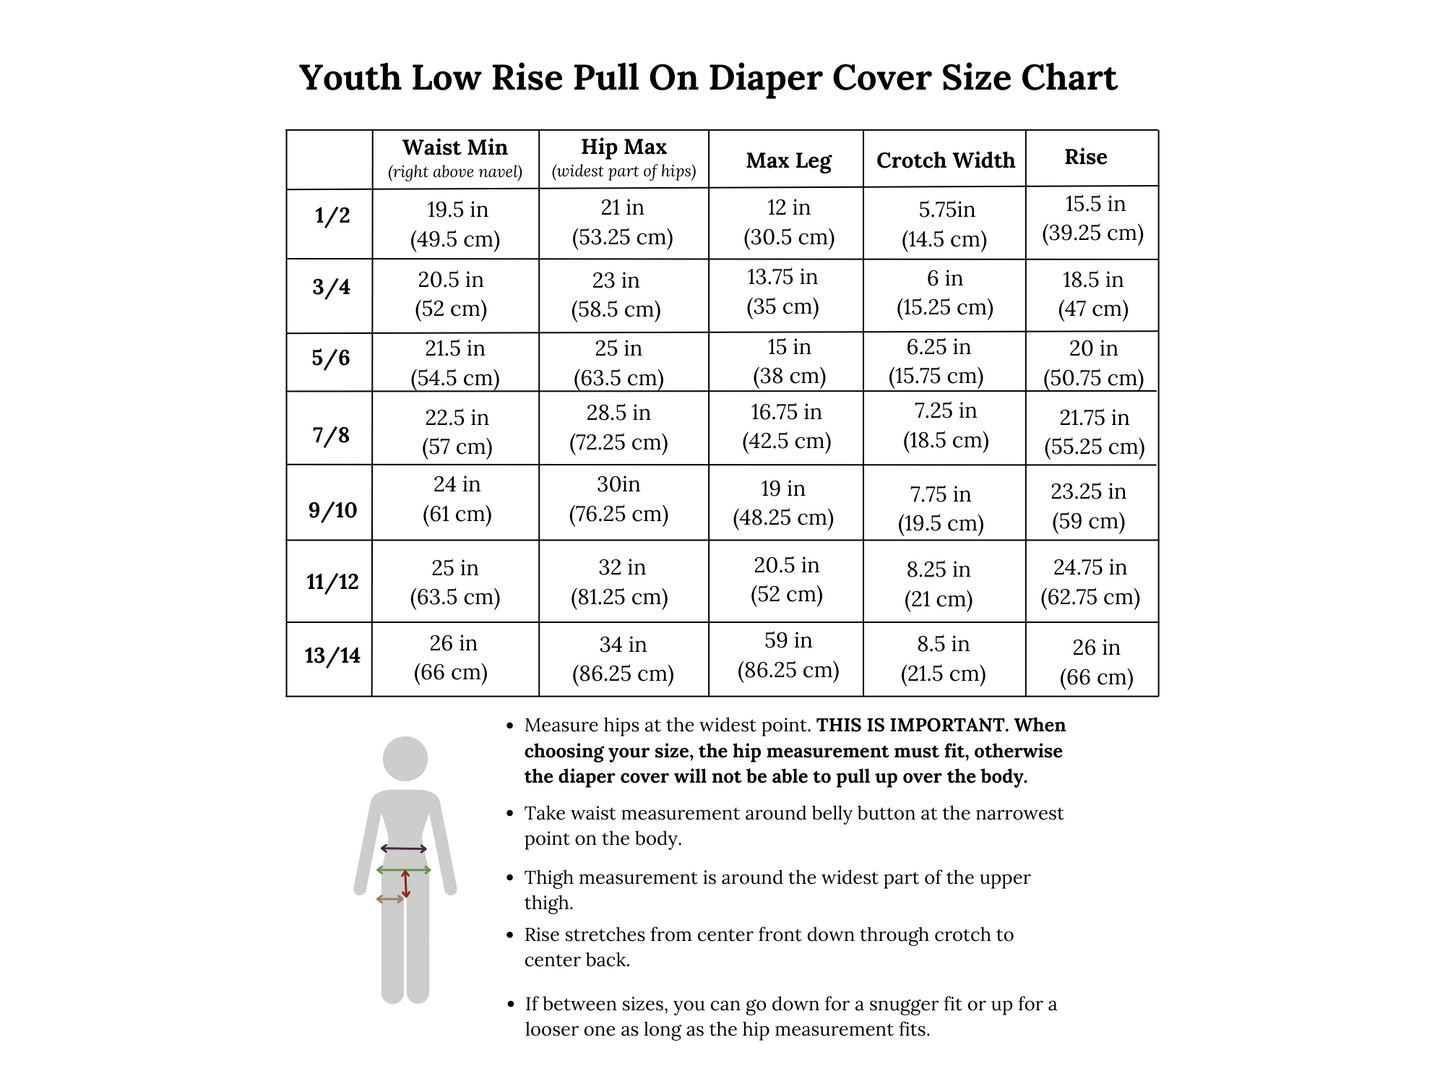 Youth Low Rise Pull On Diaper Cover Sewing Pattern